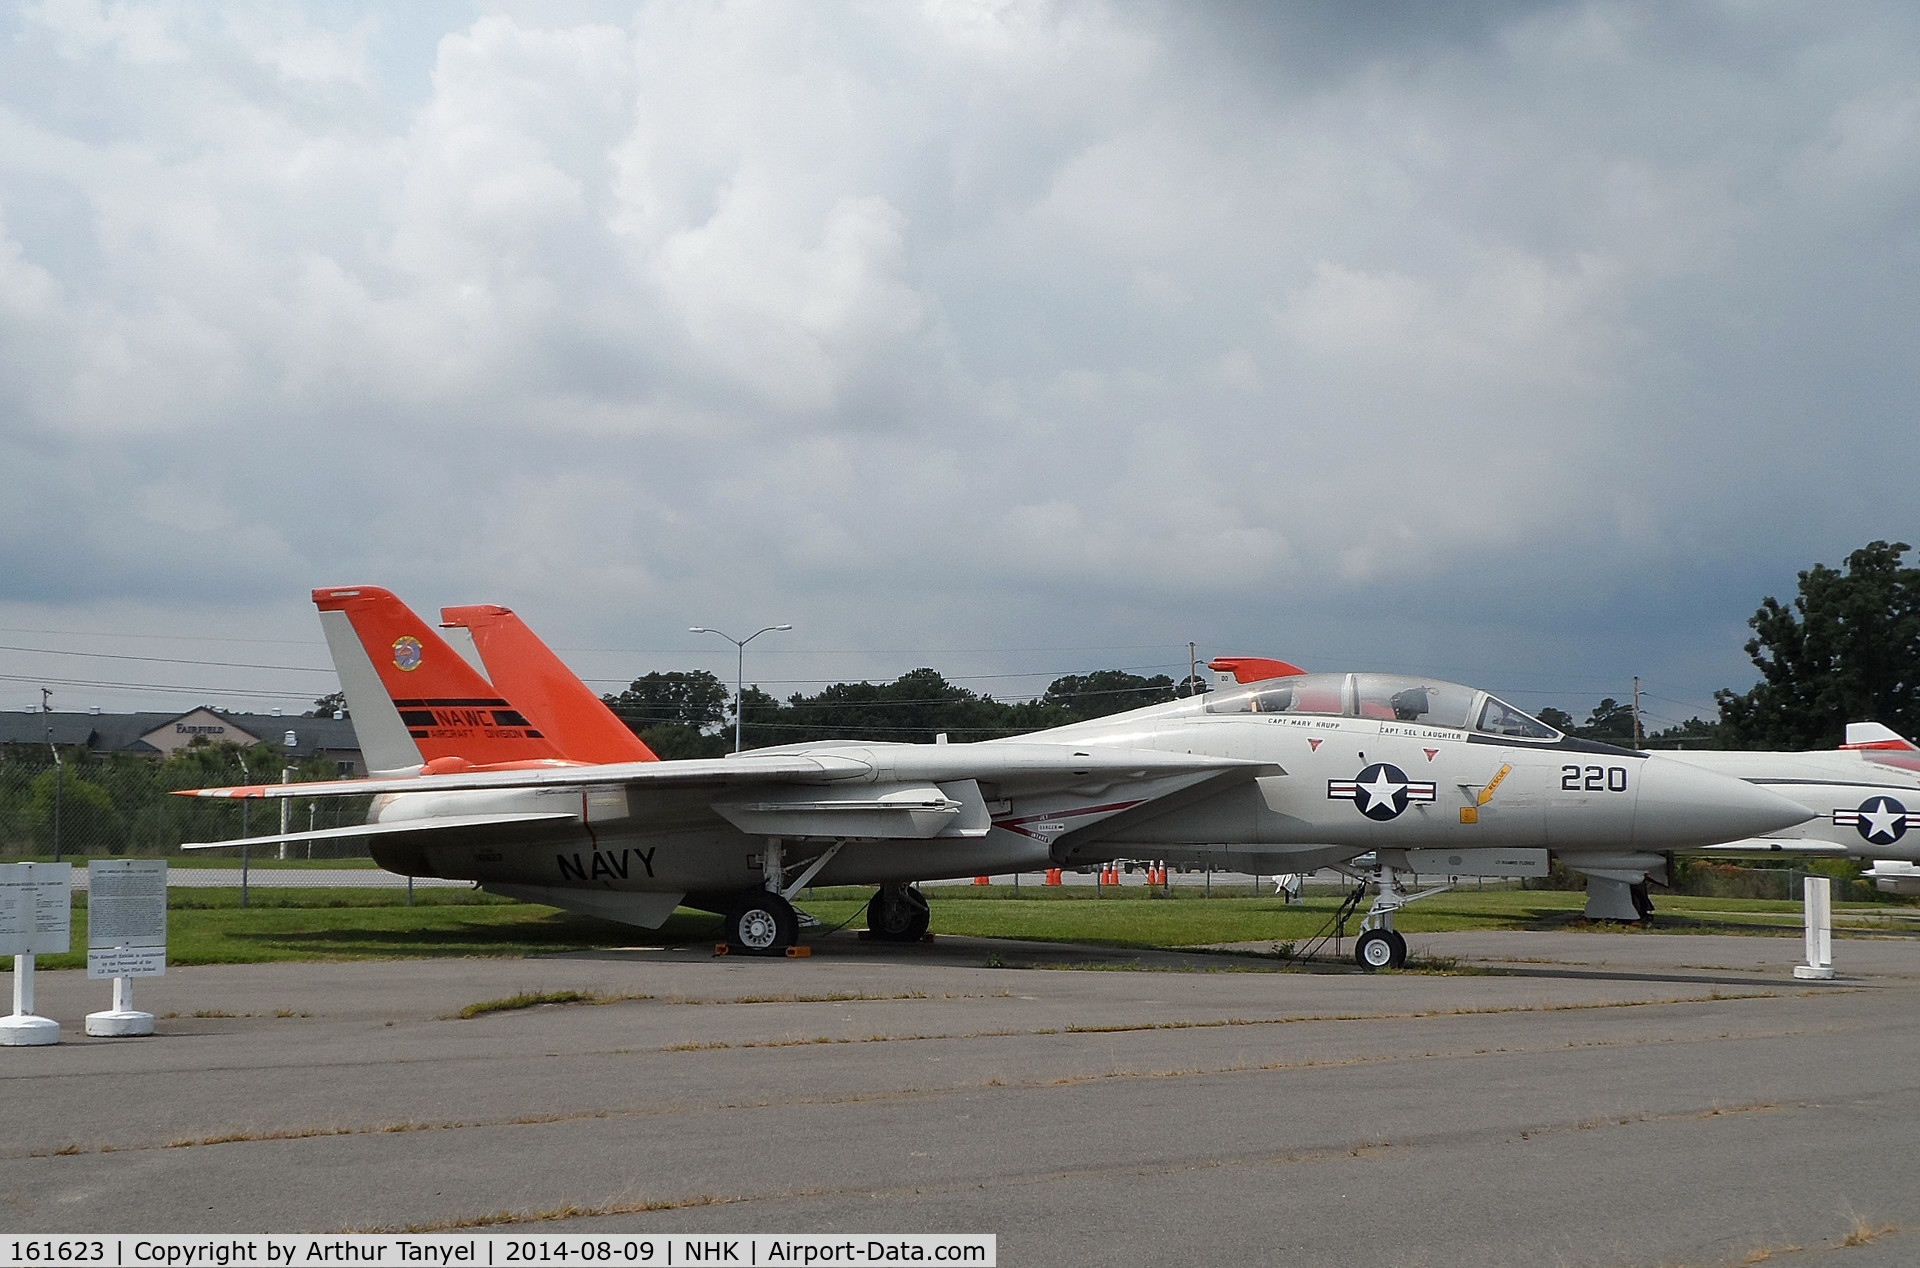 161623, Grumman F-14D Tomcat C/N 482, On display @ the Patuxent River Naval Air Station